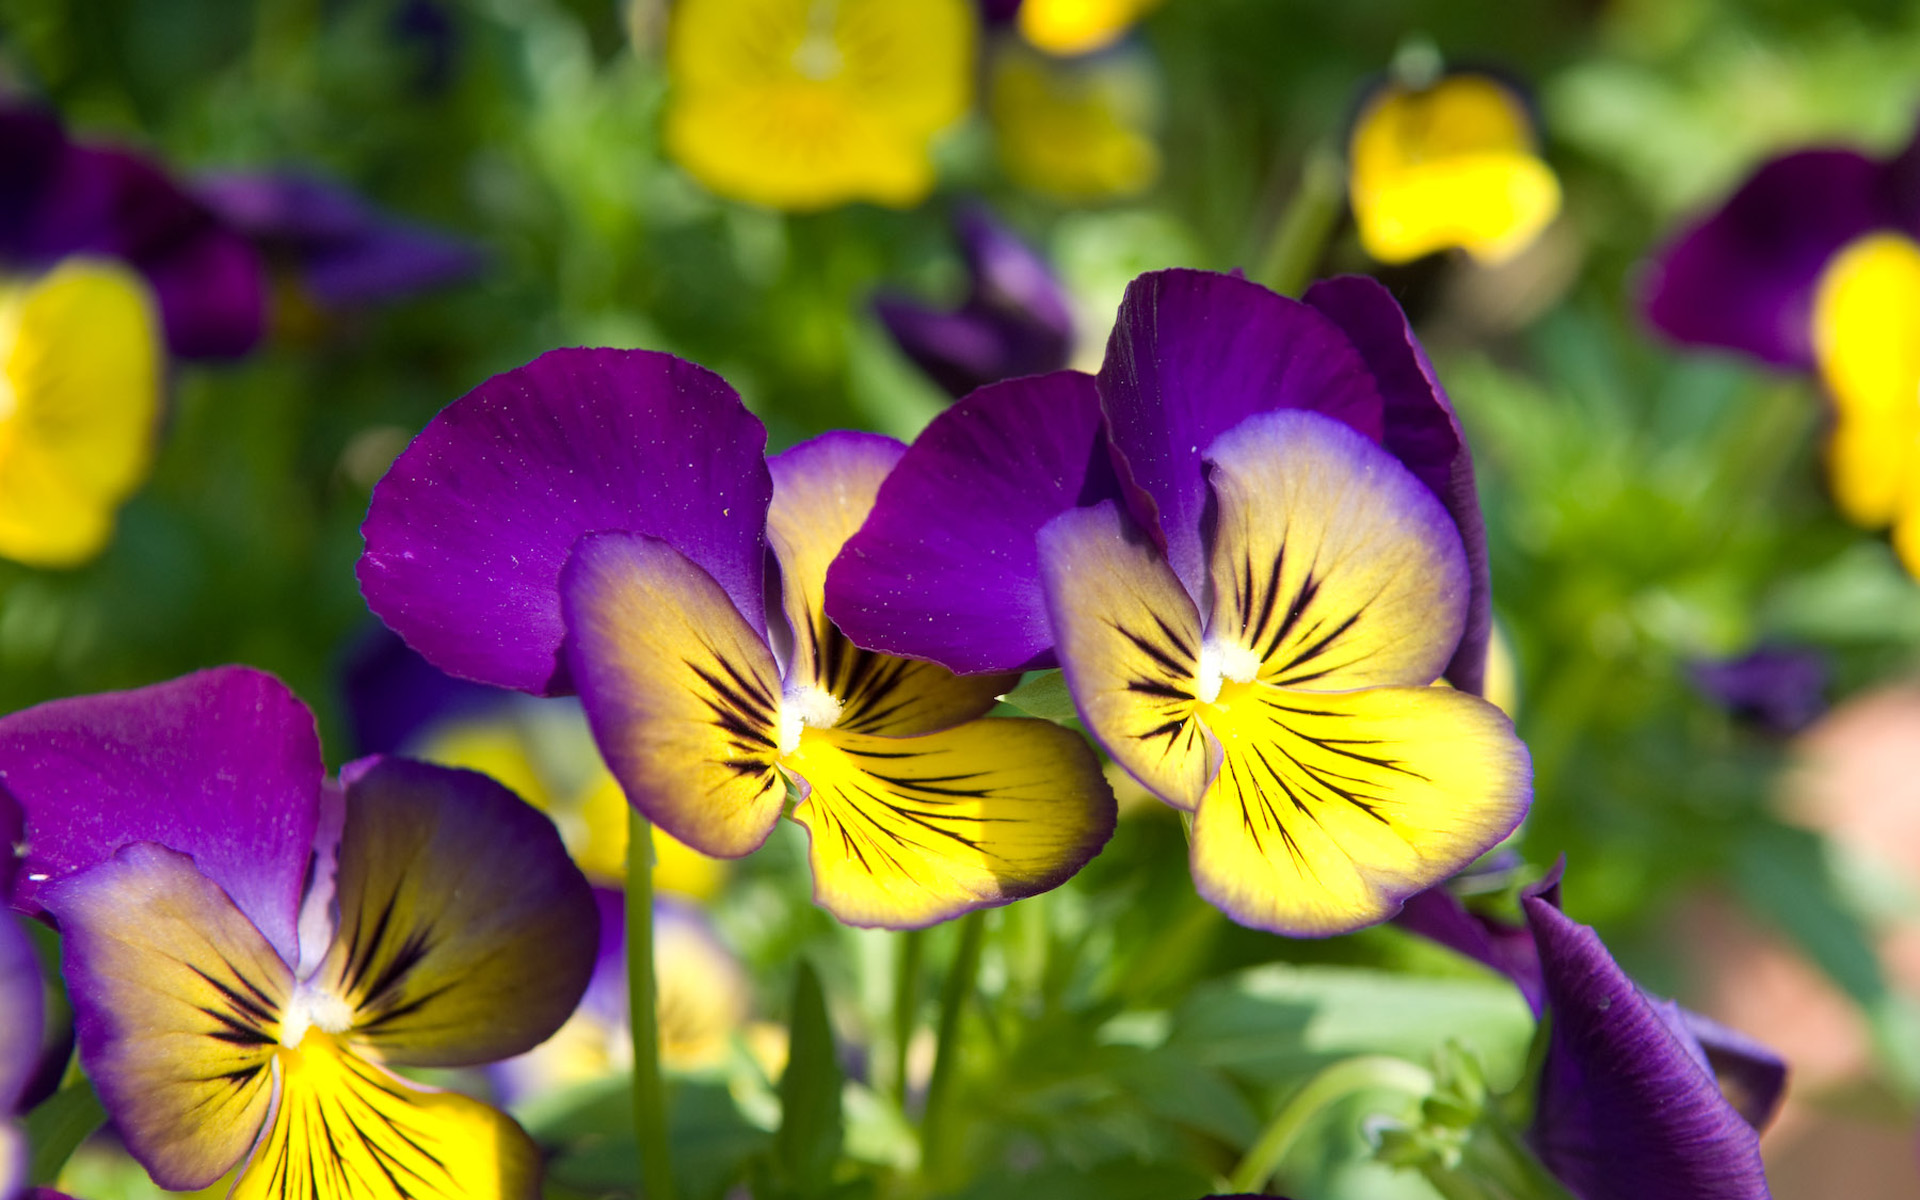 Wallpapers pansies glade grass on the desktop